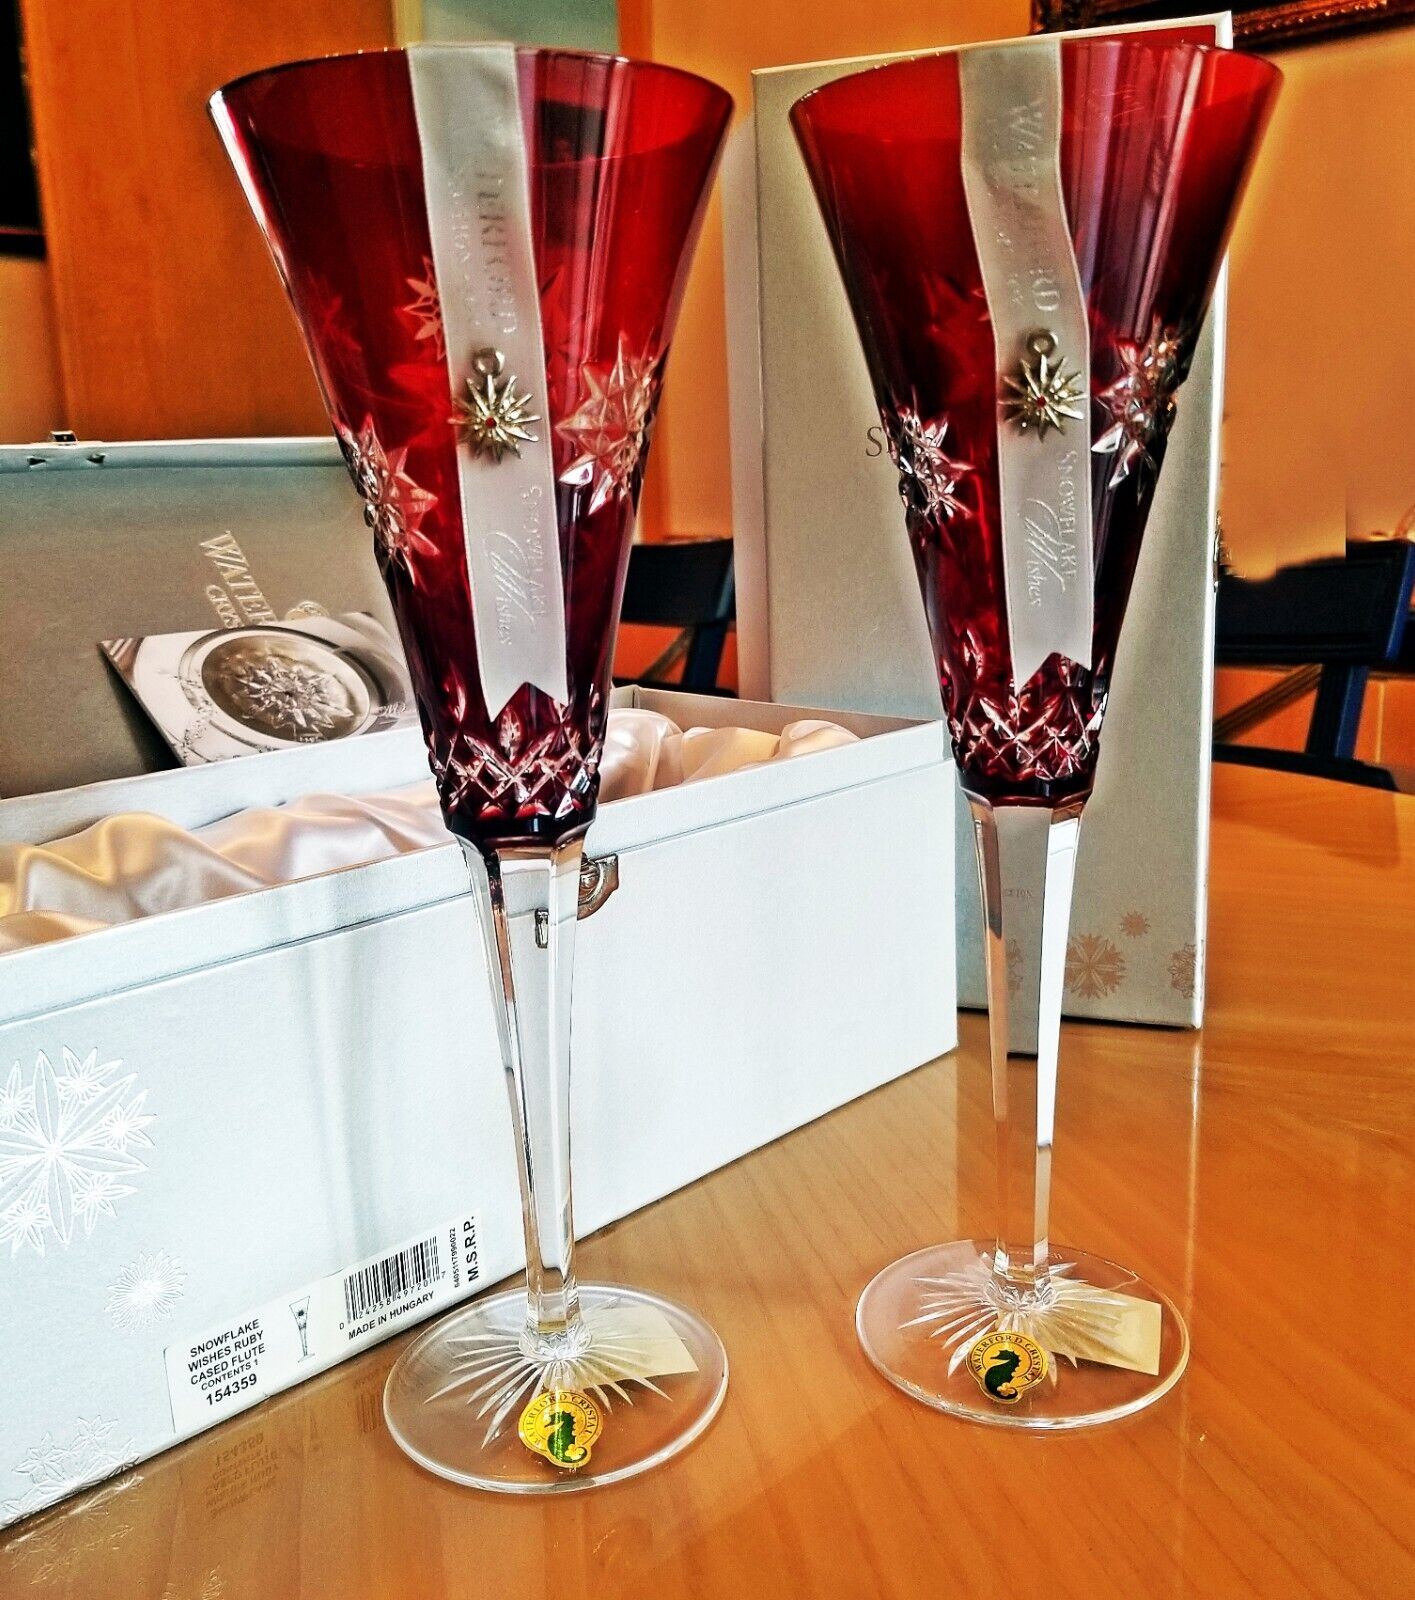 SALE TWO WATERFORD SNOWFLAKE WISHES FOR JOY RUBY FLUTES, NEW IN THE BOXES 